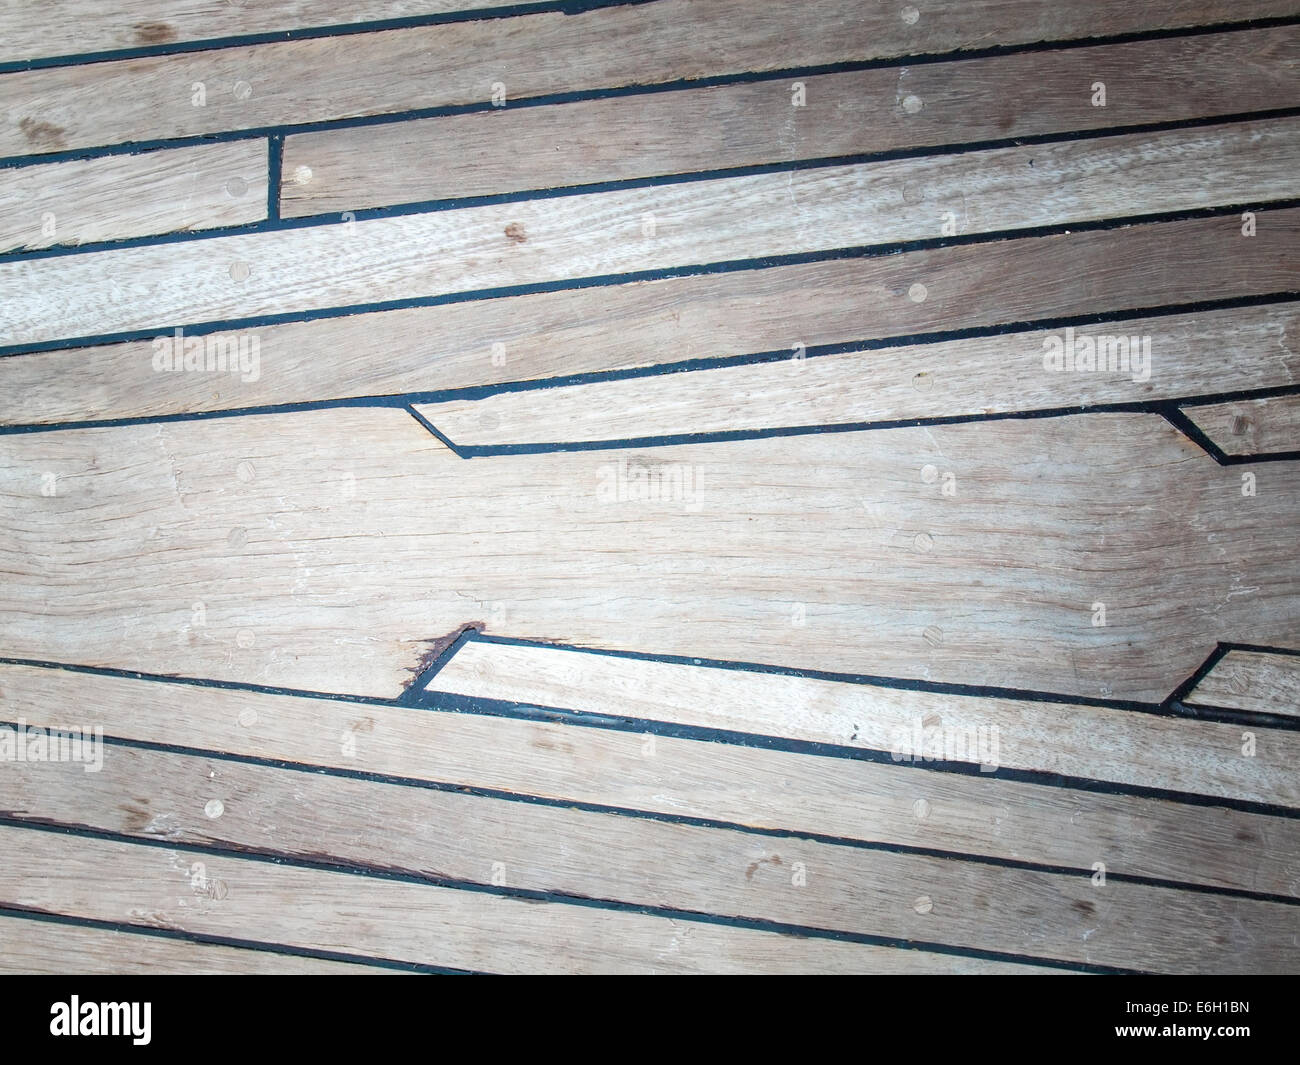 aged ships deck in teak with black caulking Stock Photo